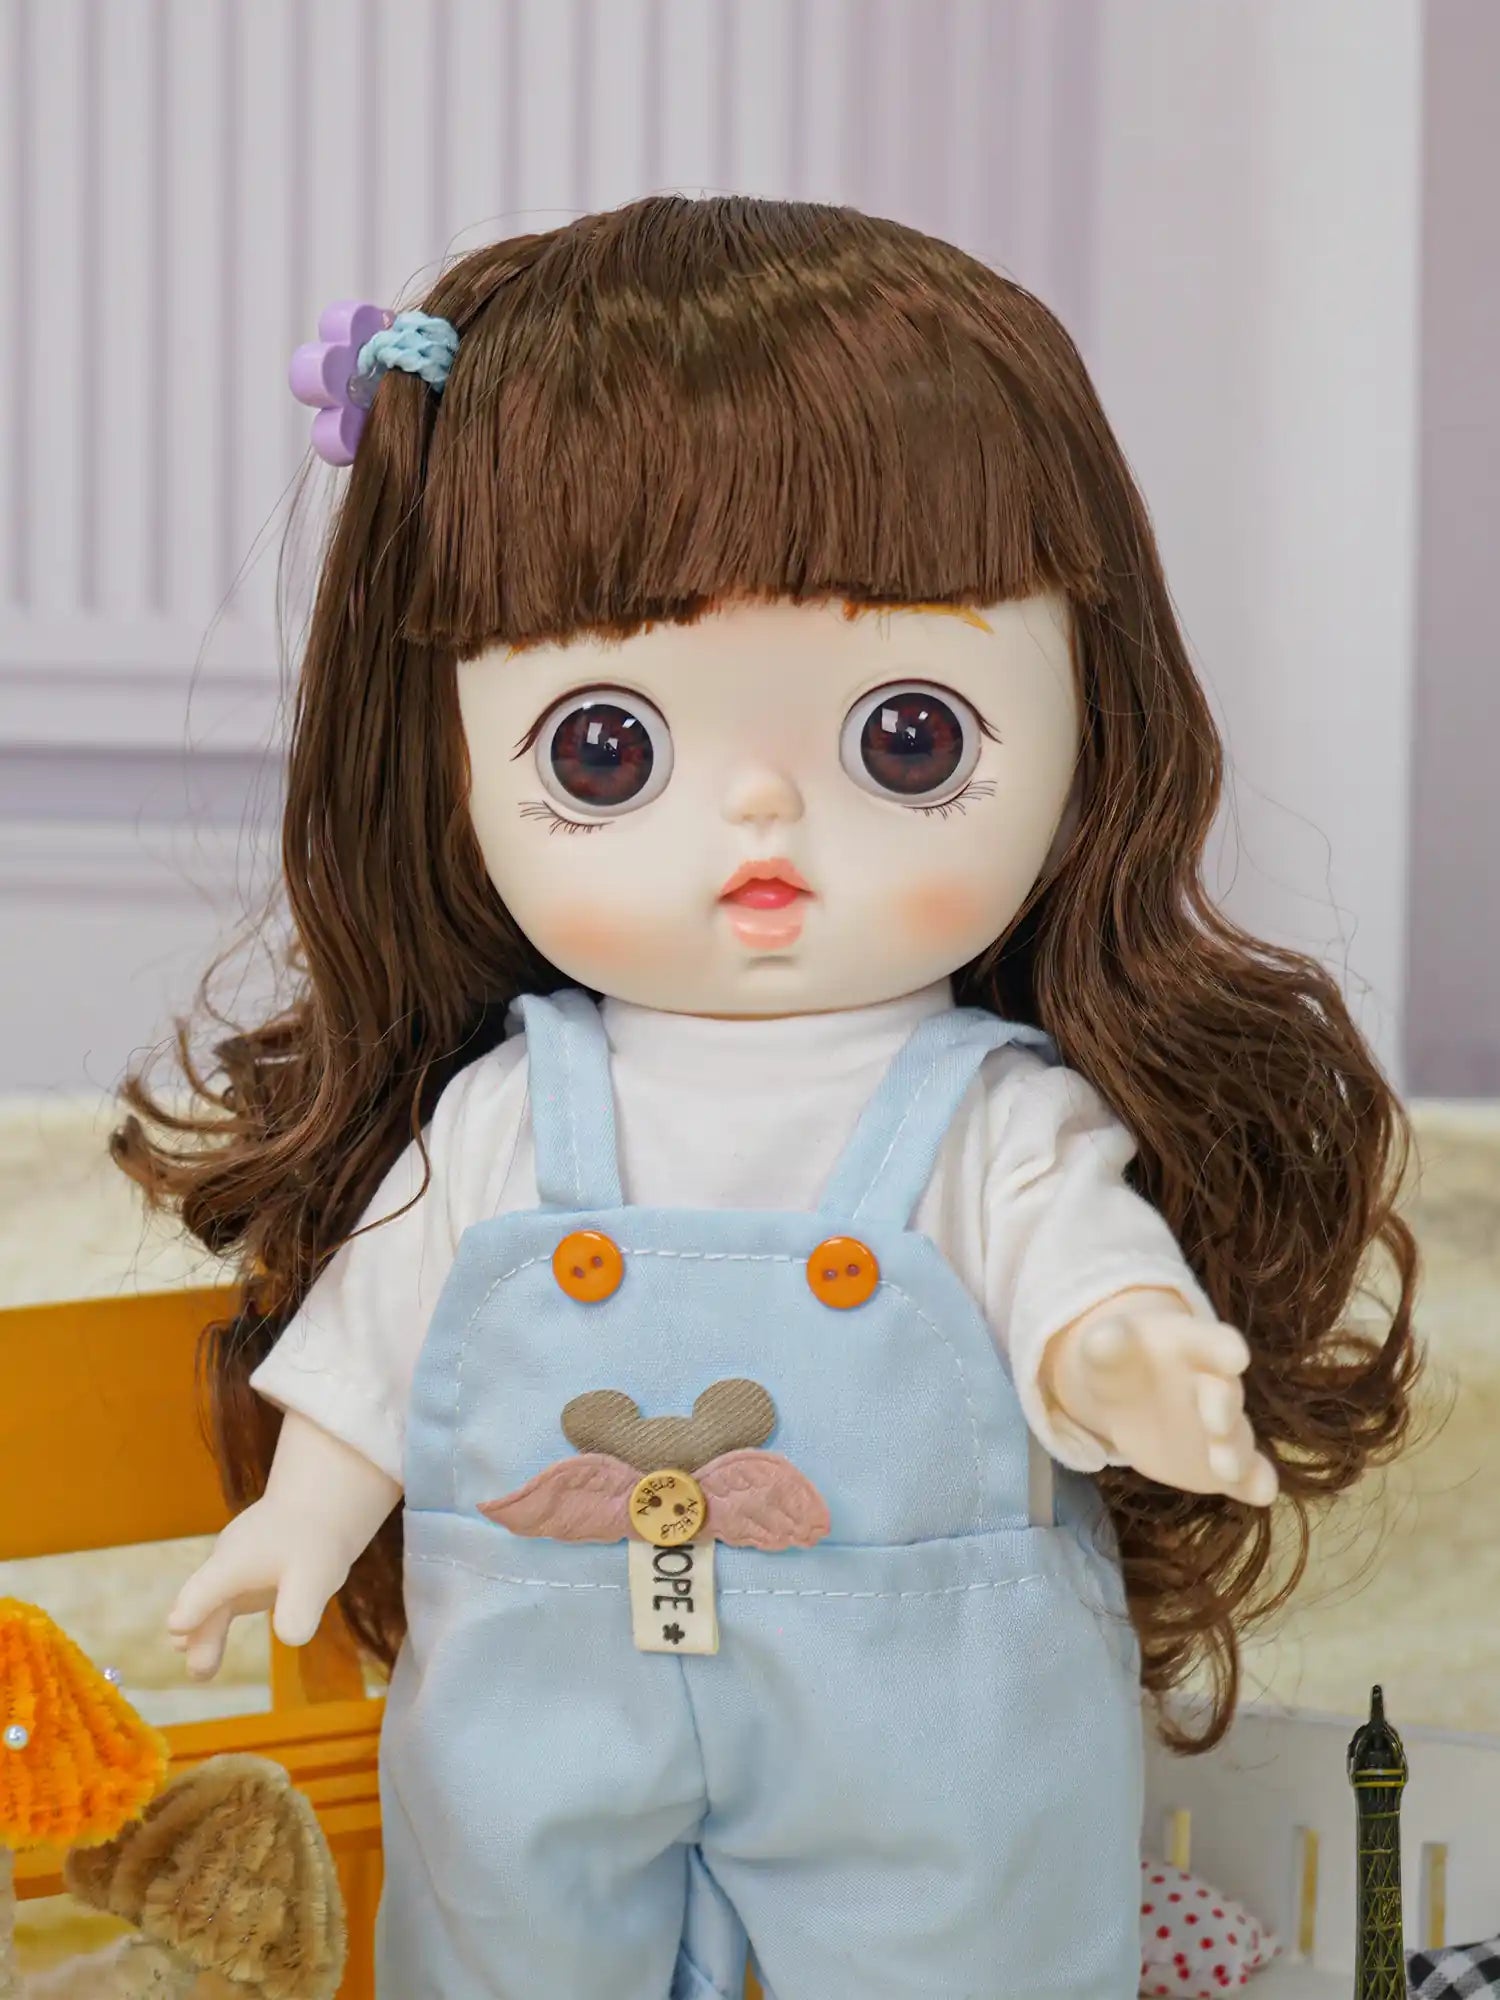 Toy doll with a whimsical look, dressed in light blue overalls and standing next to a tiny replica of the Eiffel Tower.